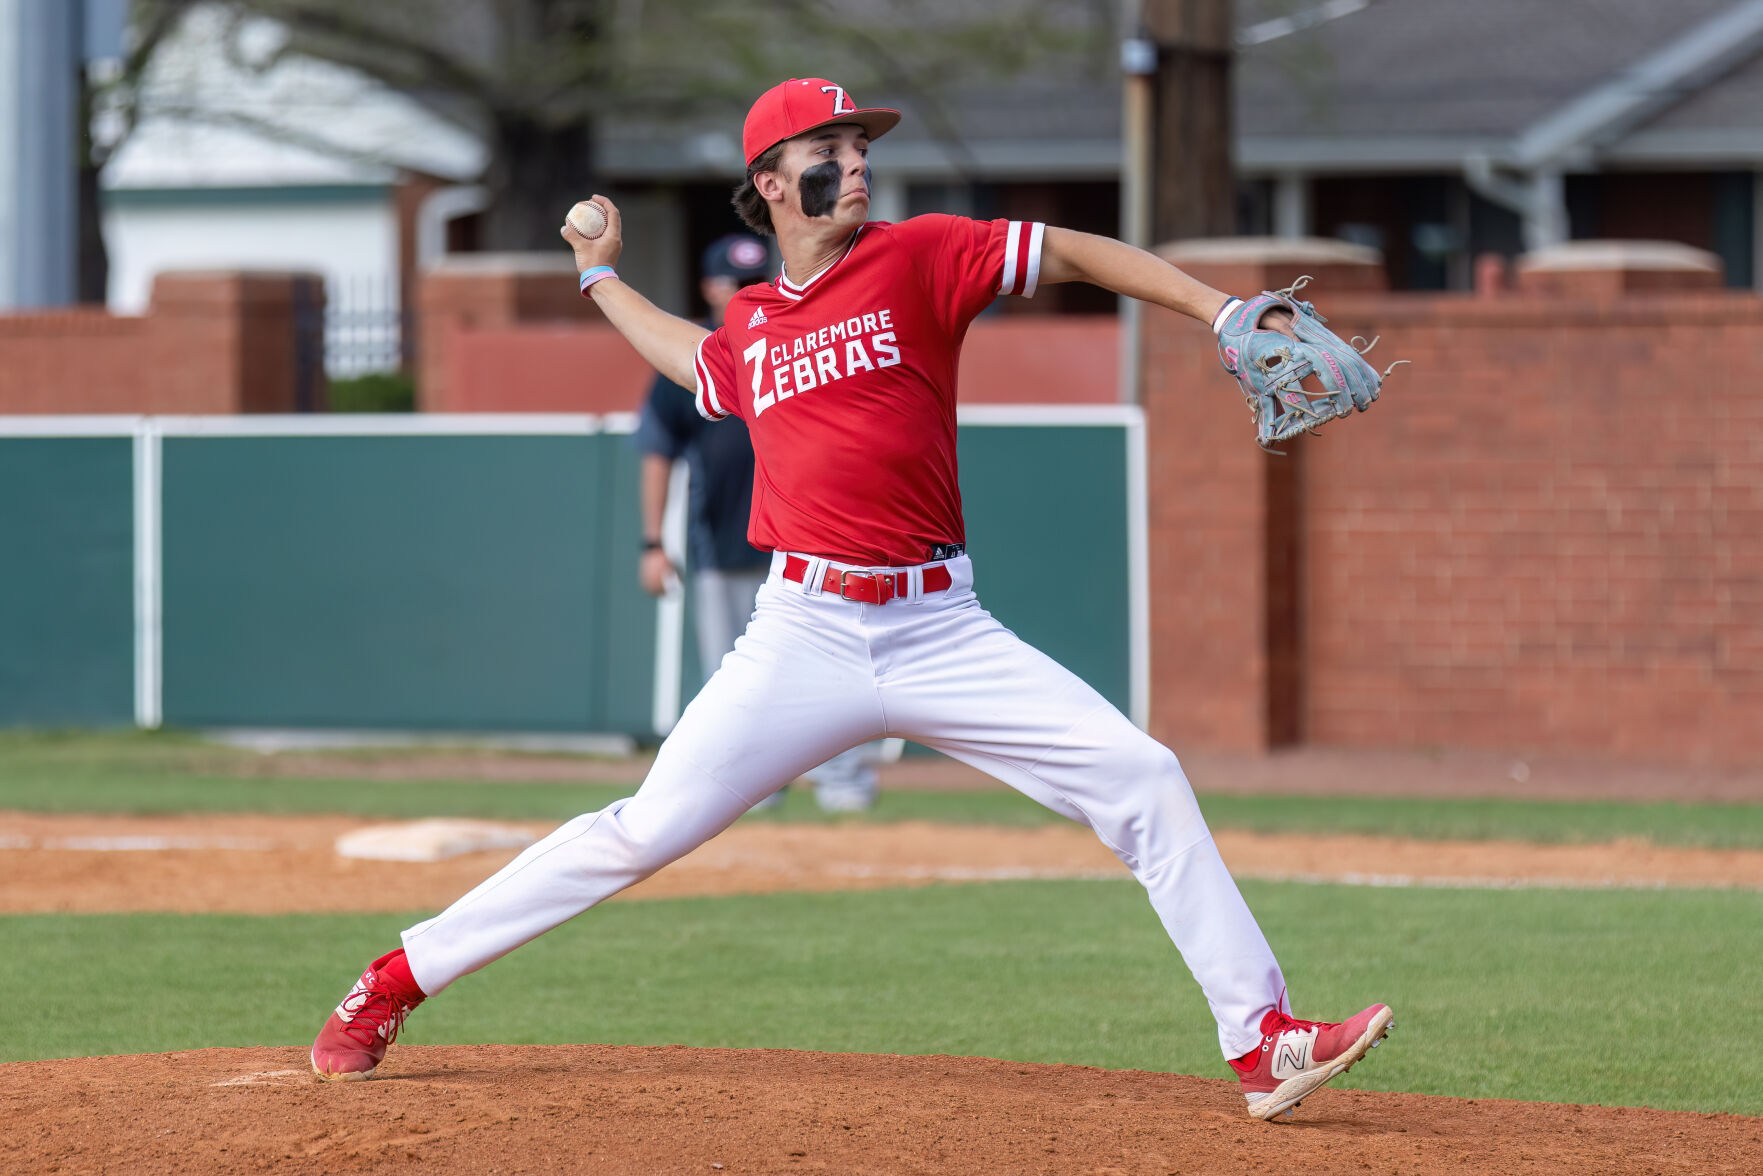 BASEBALL: Claremore completes series sweep of Grove